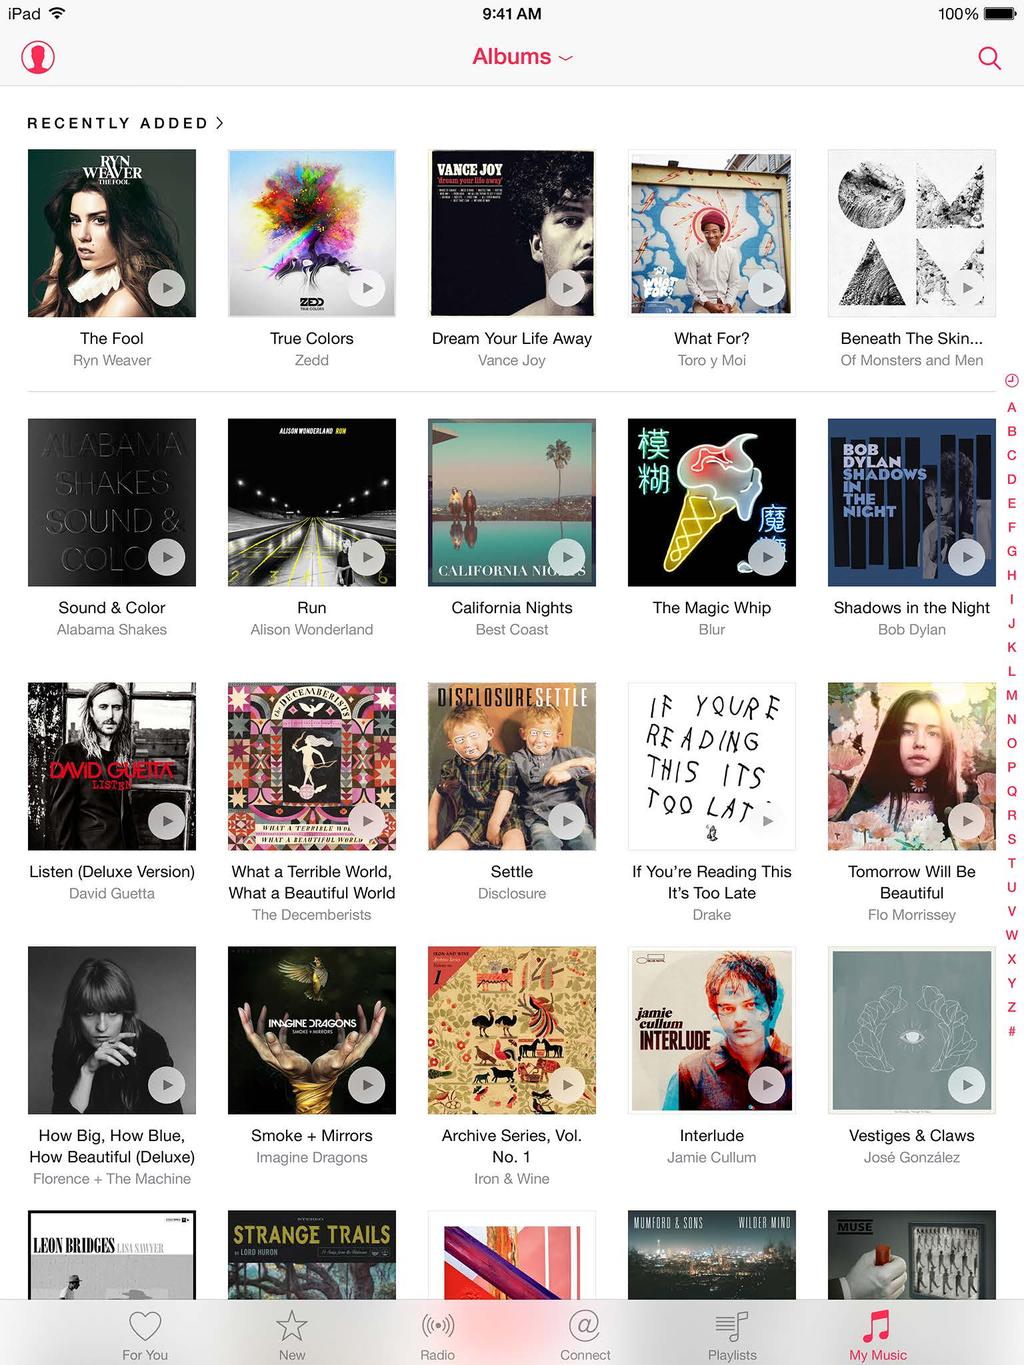 My Music My Music includes any Apple Music content you added, music and music videos synced to ipad, itunes purchases, and the music you make available through itunes Match. Choose a sorting method.